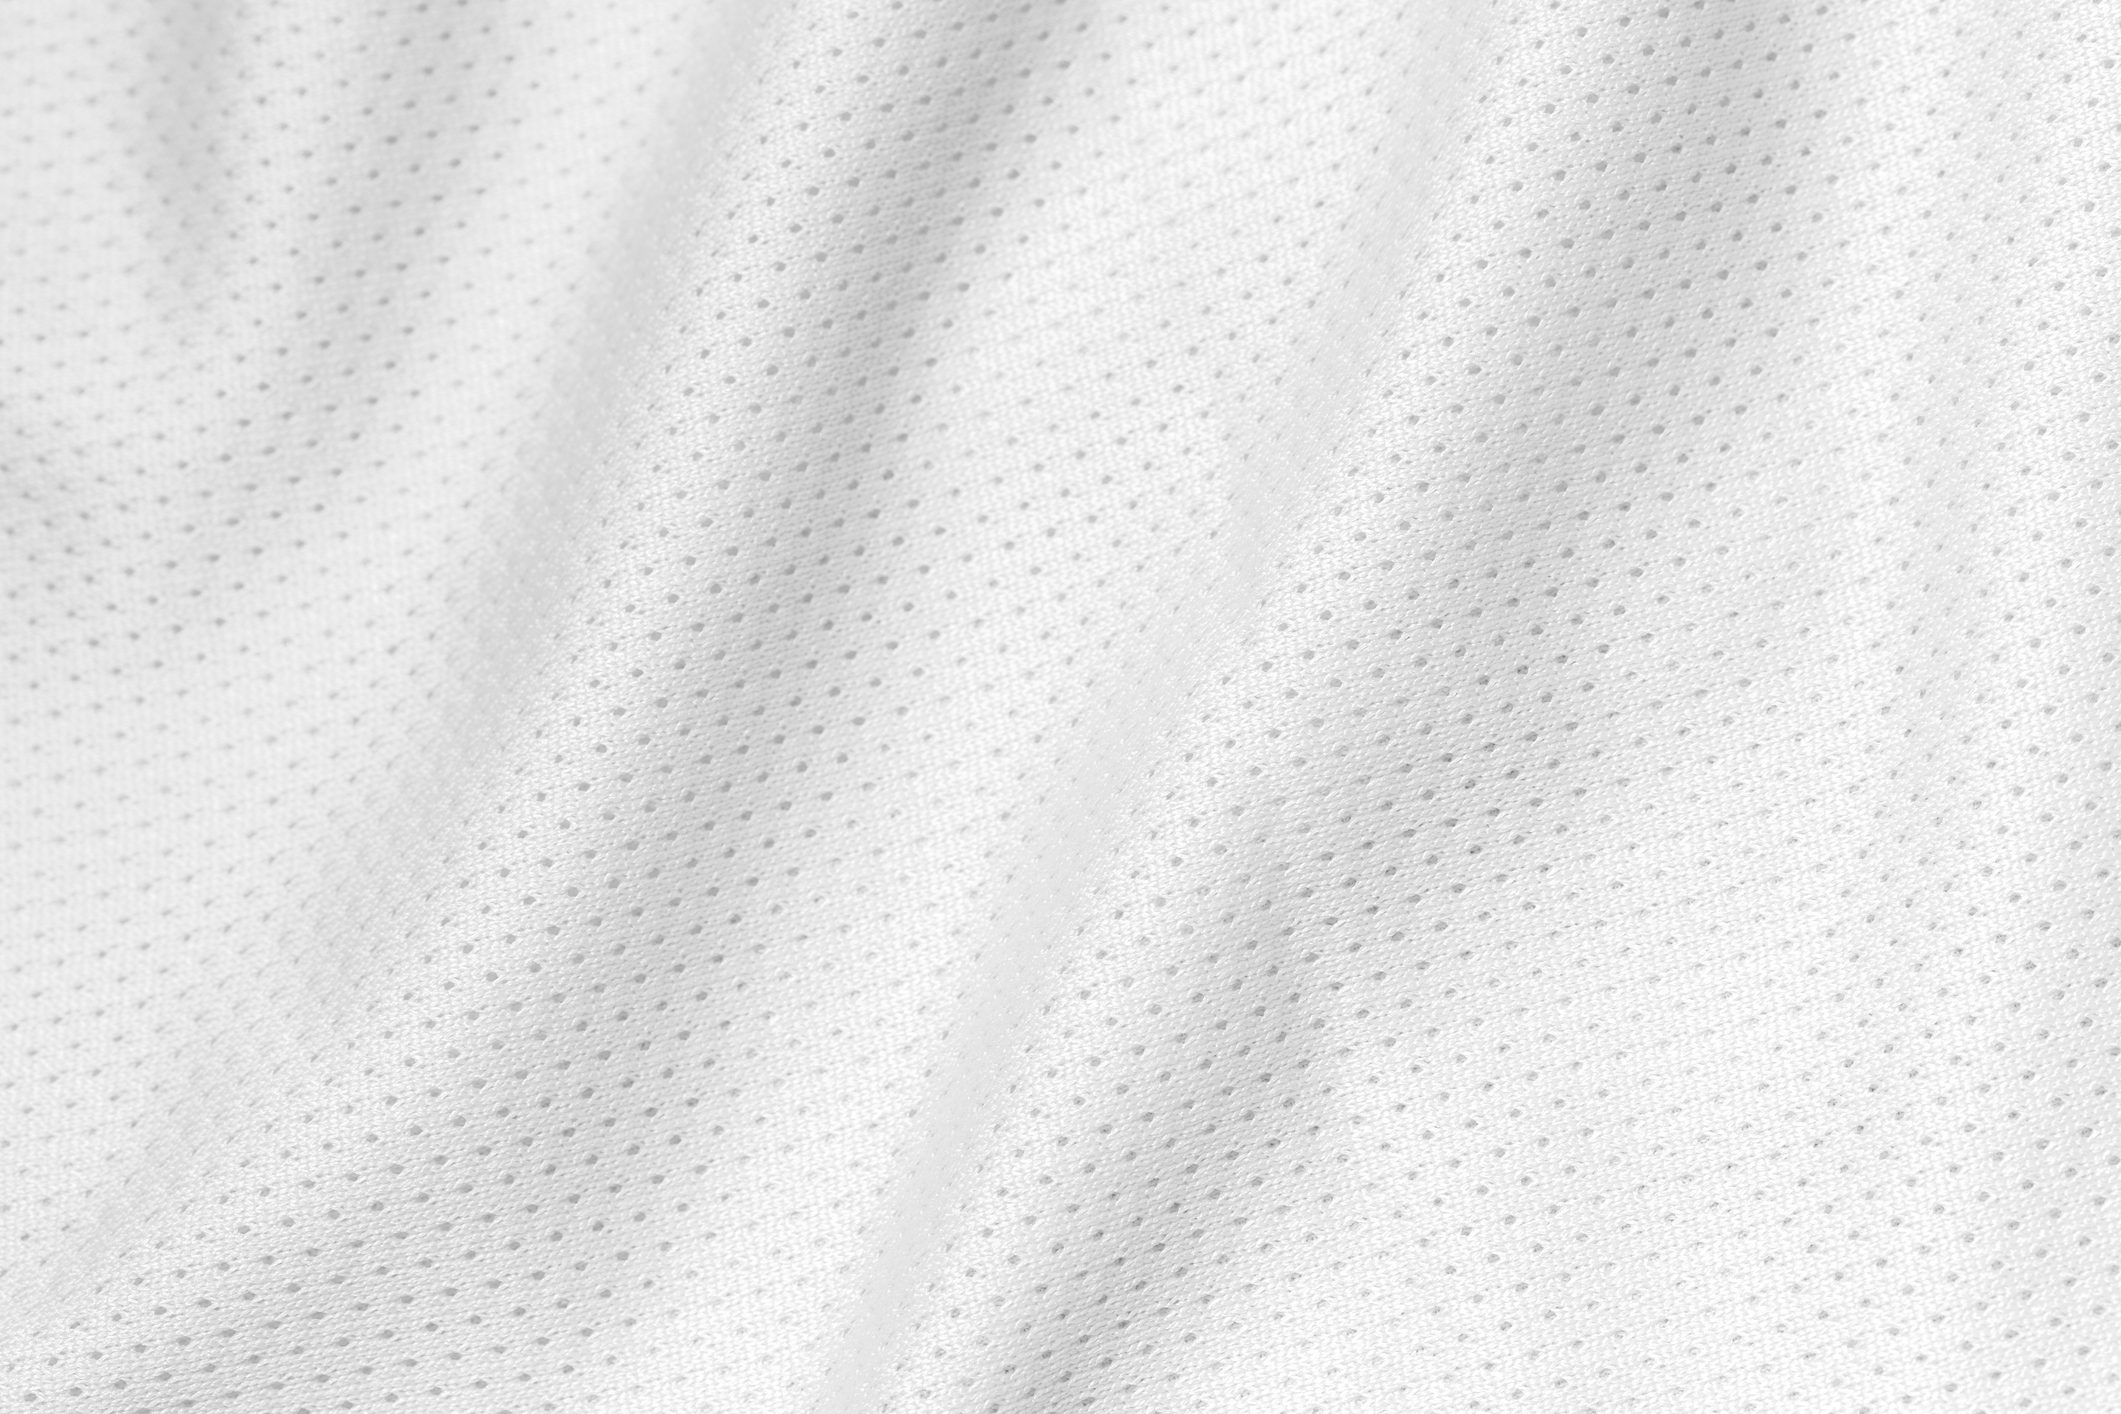 White color sports clothing fabric football shirt jersey texture and textile background.